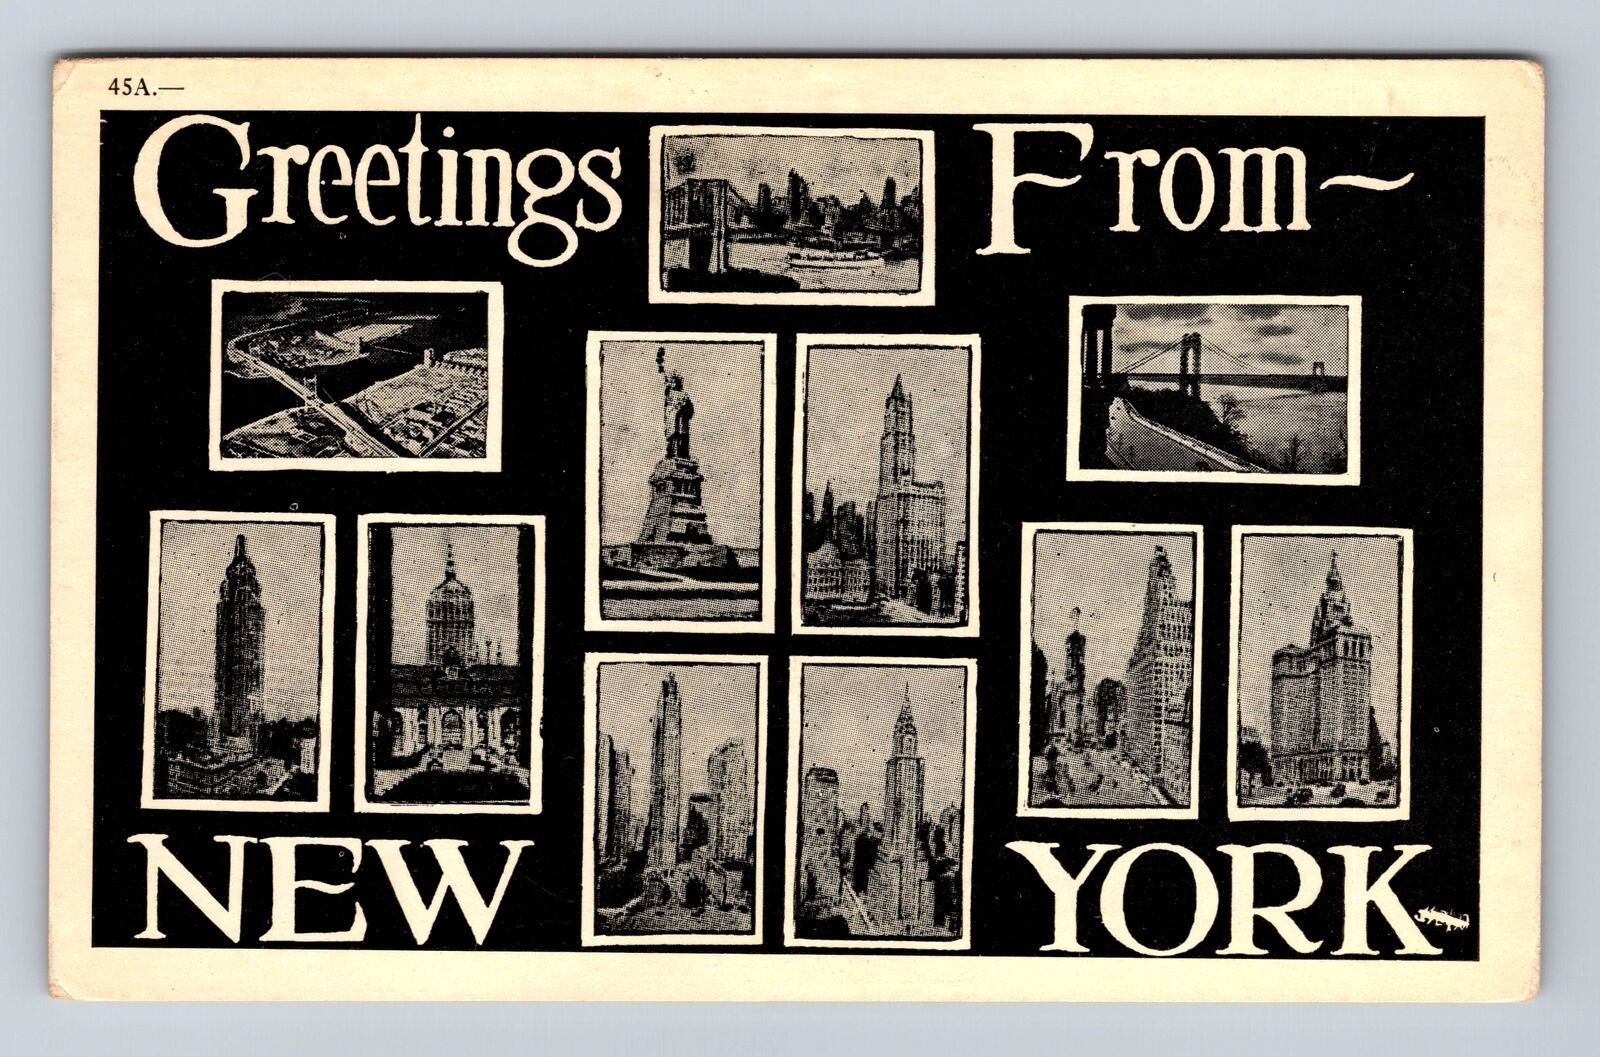 New York City NY, General Greetings, Points of Interest, Vintage c1944 Postcard